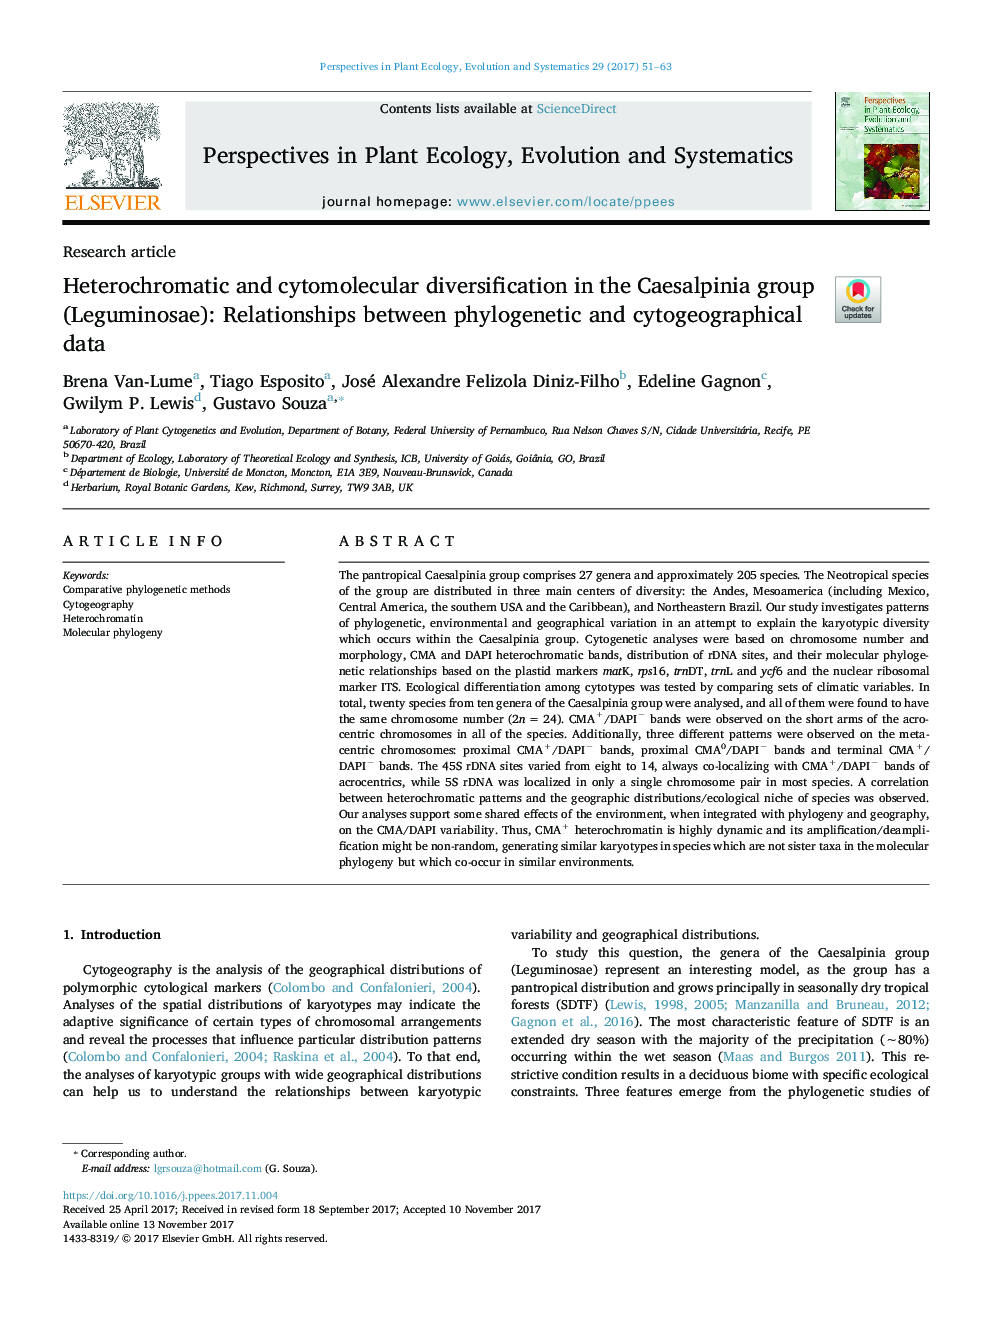 Heterochromatic and cytomolecular diversification in the Caesalpinia group (Leguminosae): Relationships between phylogenetic and cytogeographical data